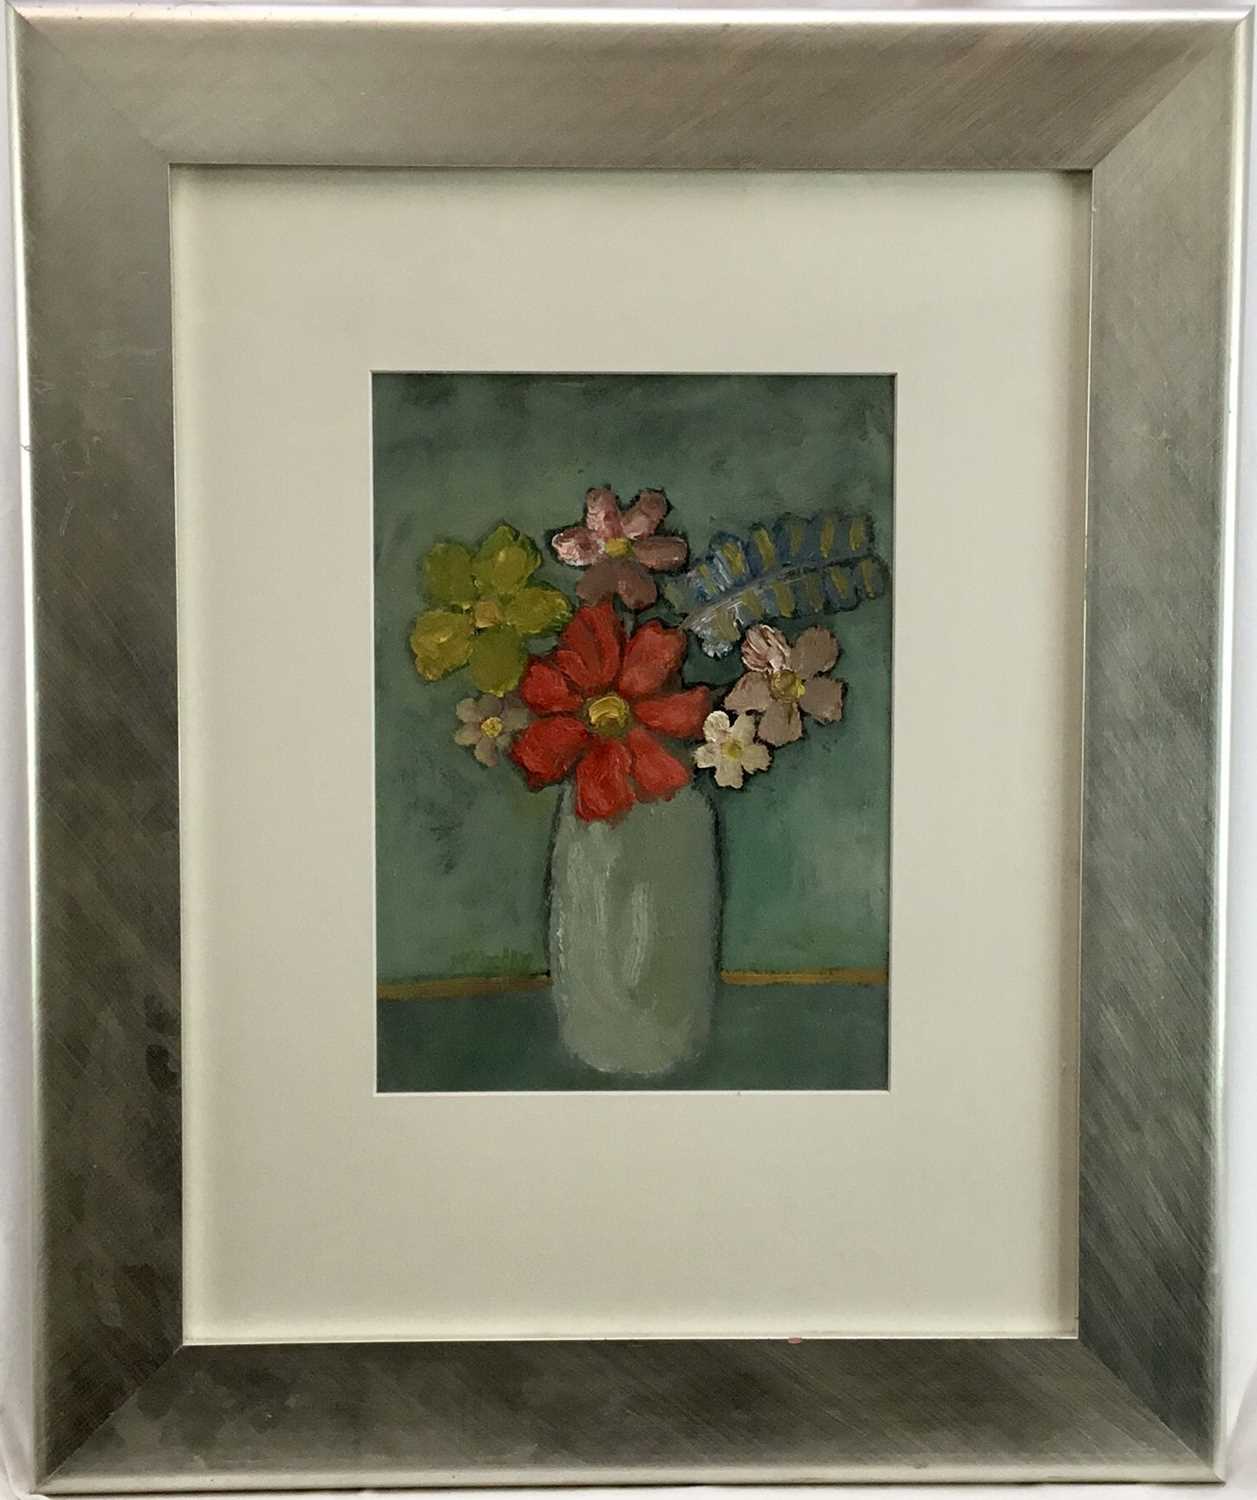 Lot 62 - Peter McCarthy oil on paper - 'Mixed flowers in a vase', signed, titled verso, 23cm x 32cm, mounted in glazed silver painted frame (54cm x 65cm overall)